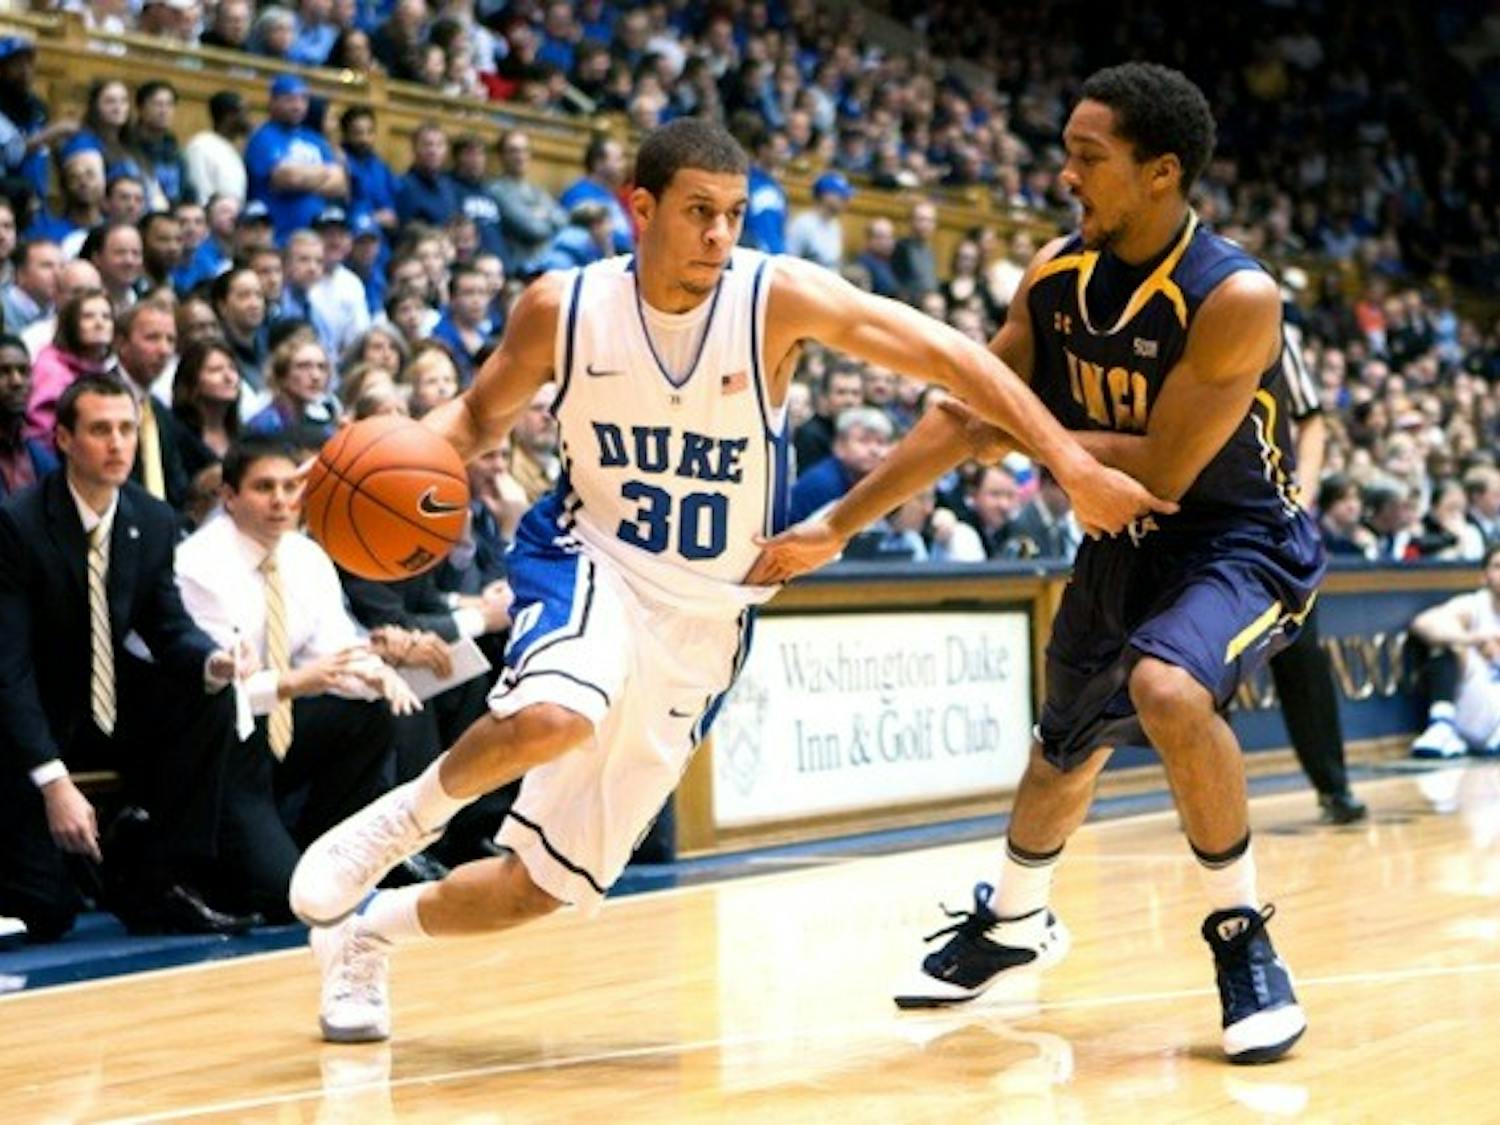 After a rocky start for the Devils, junior Seth Curry began a second-half rally for Duke, scoring 15 seconds after the period commenced.